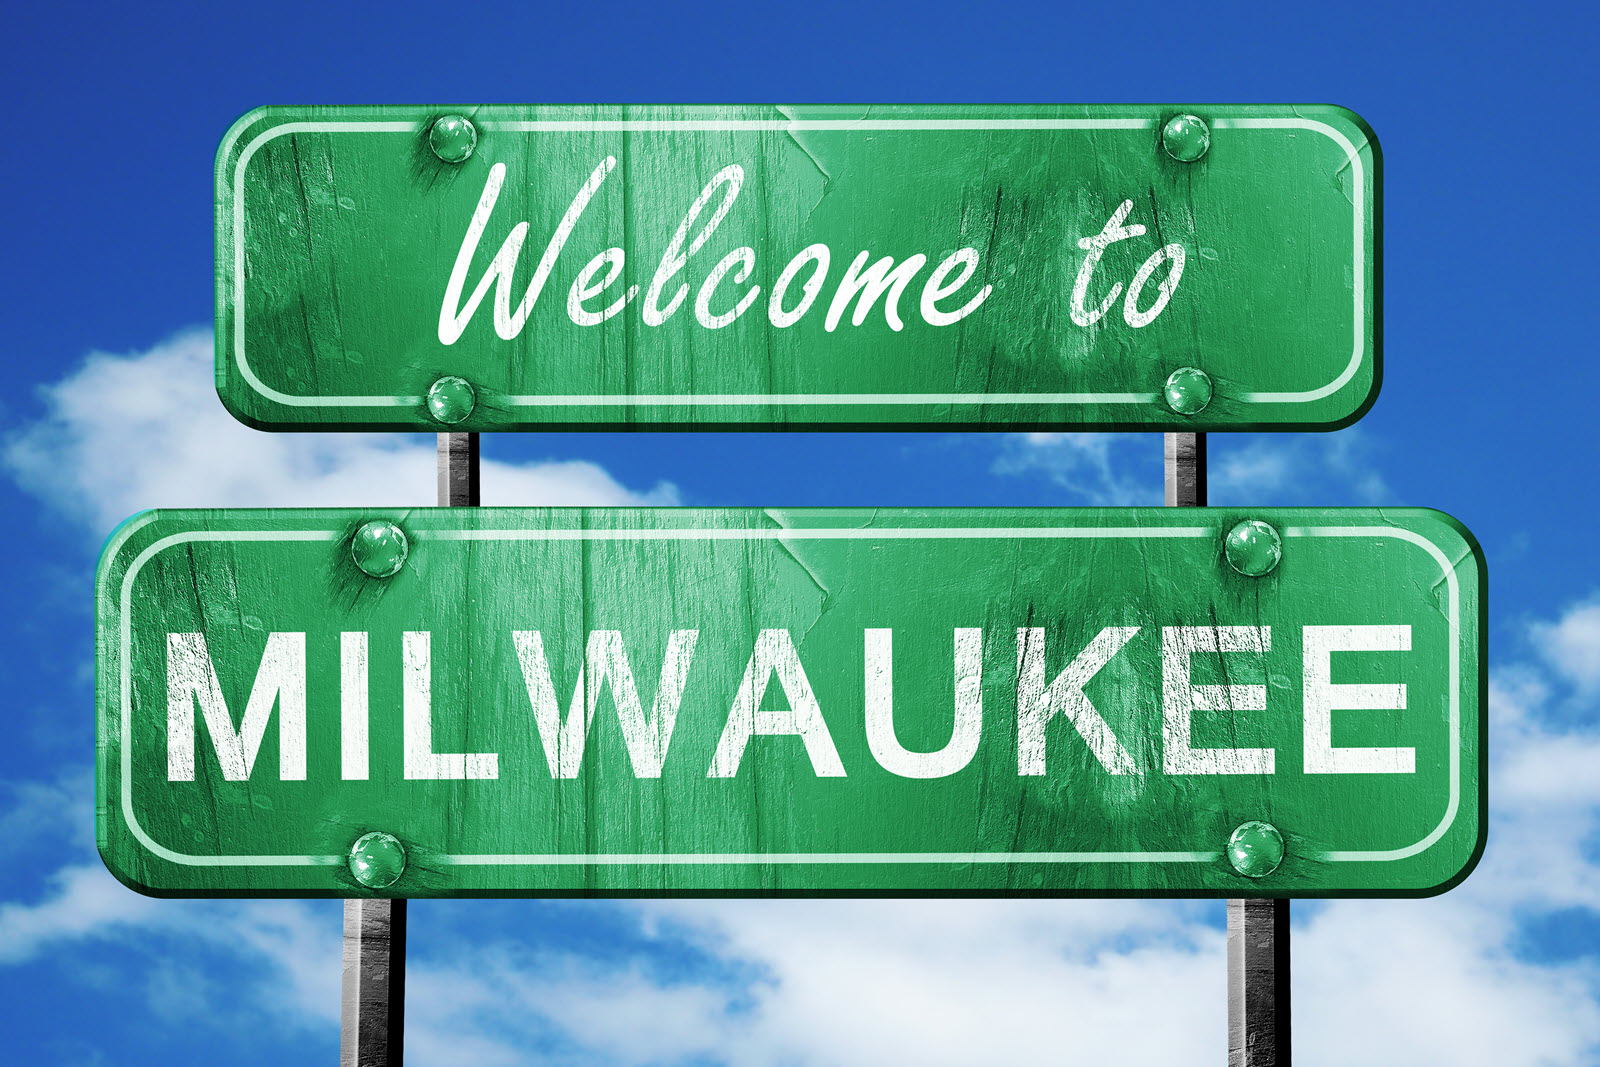 Image of green sign that reads "Welcome to Milwaukee"